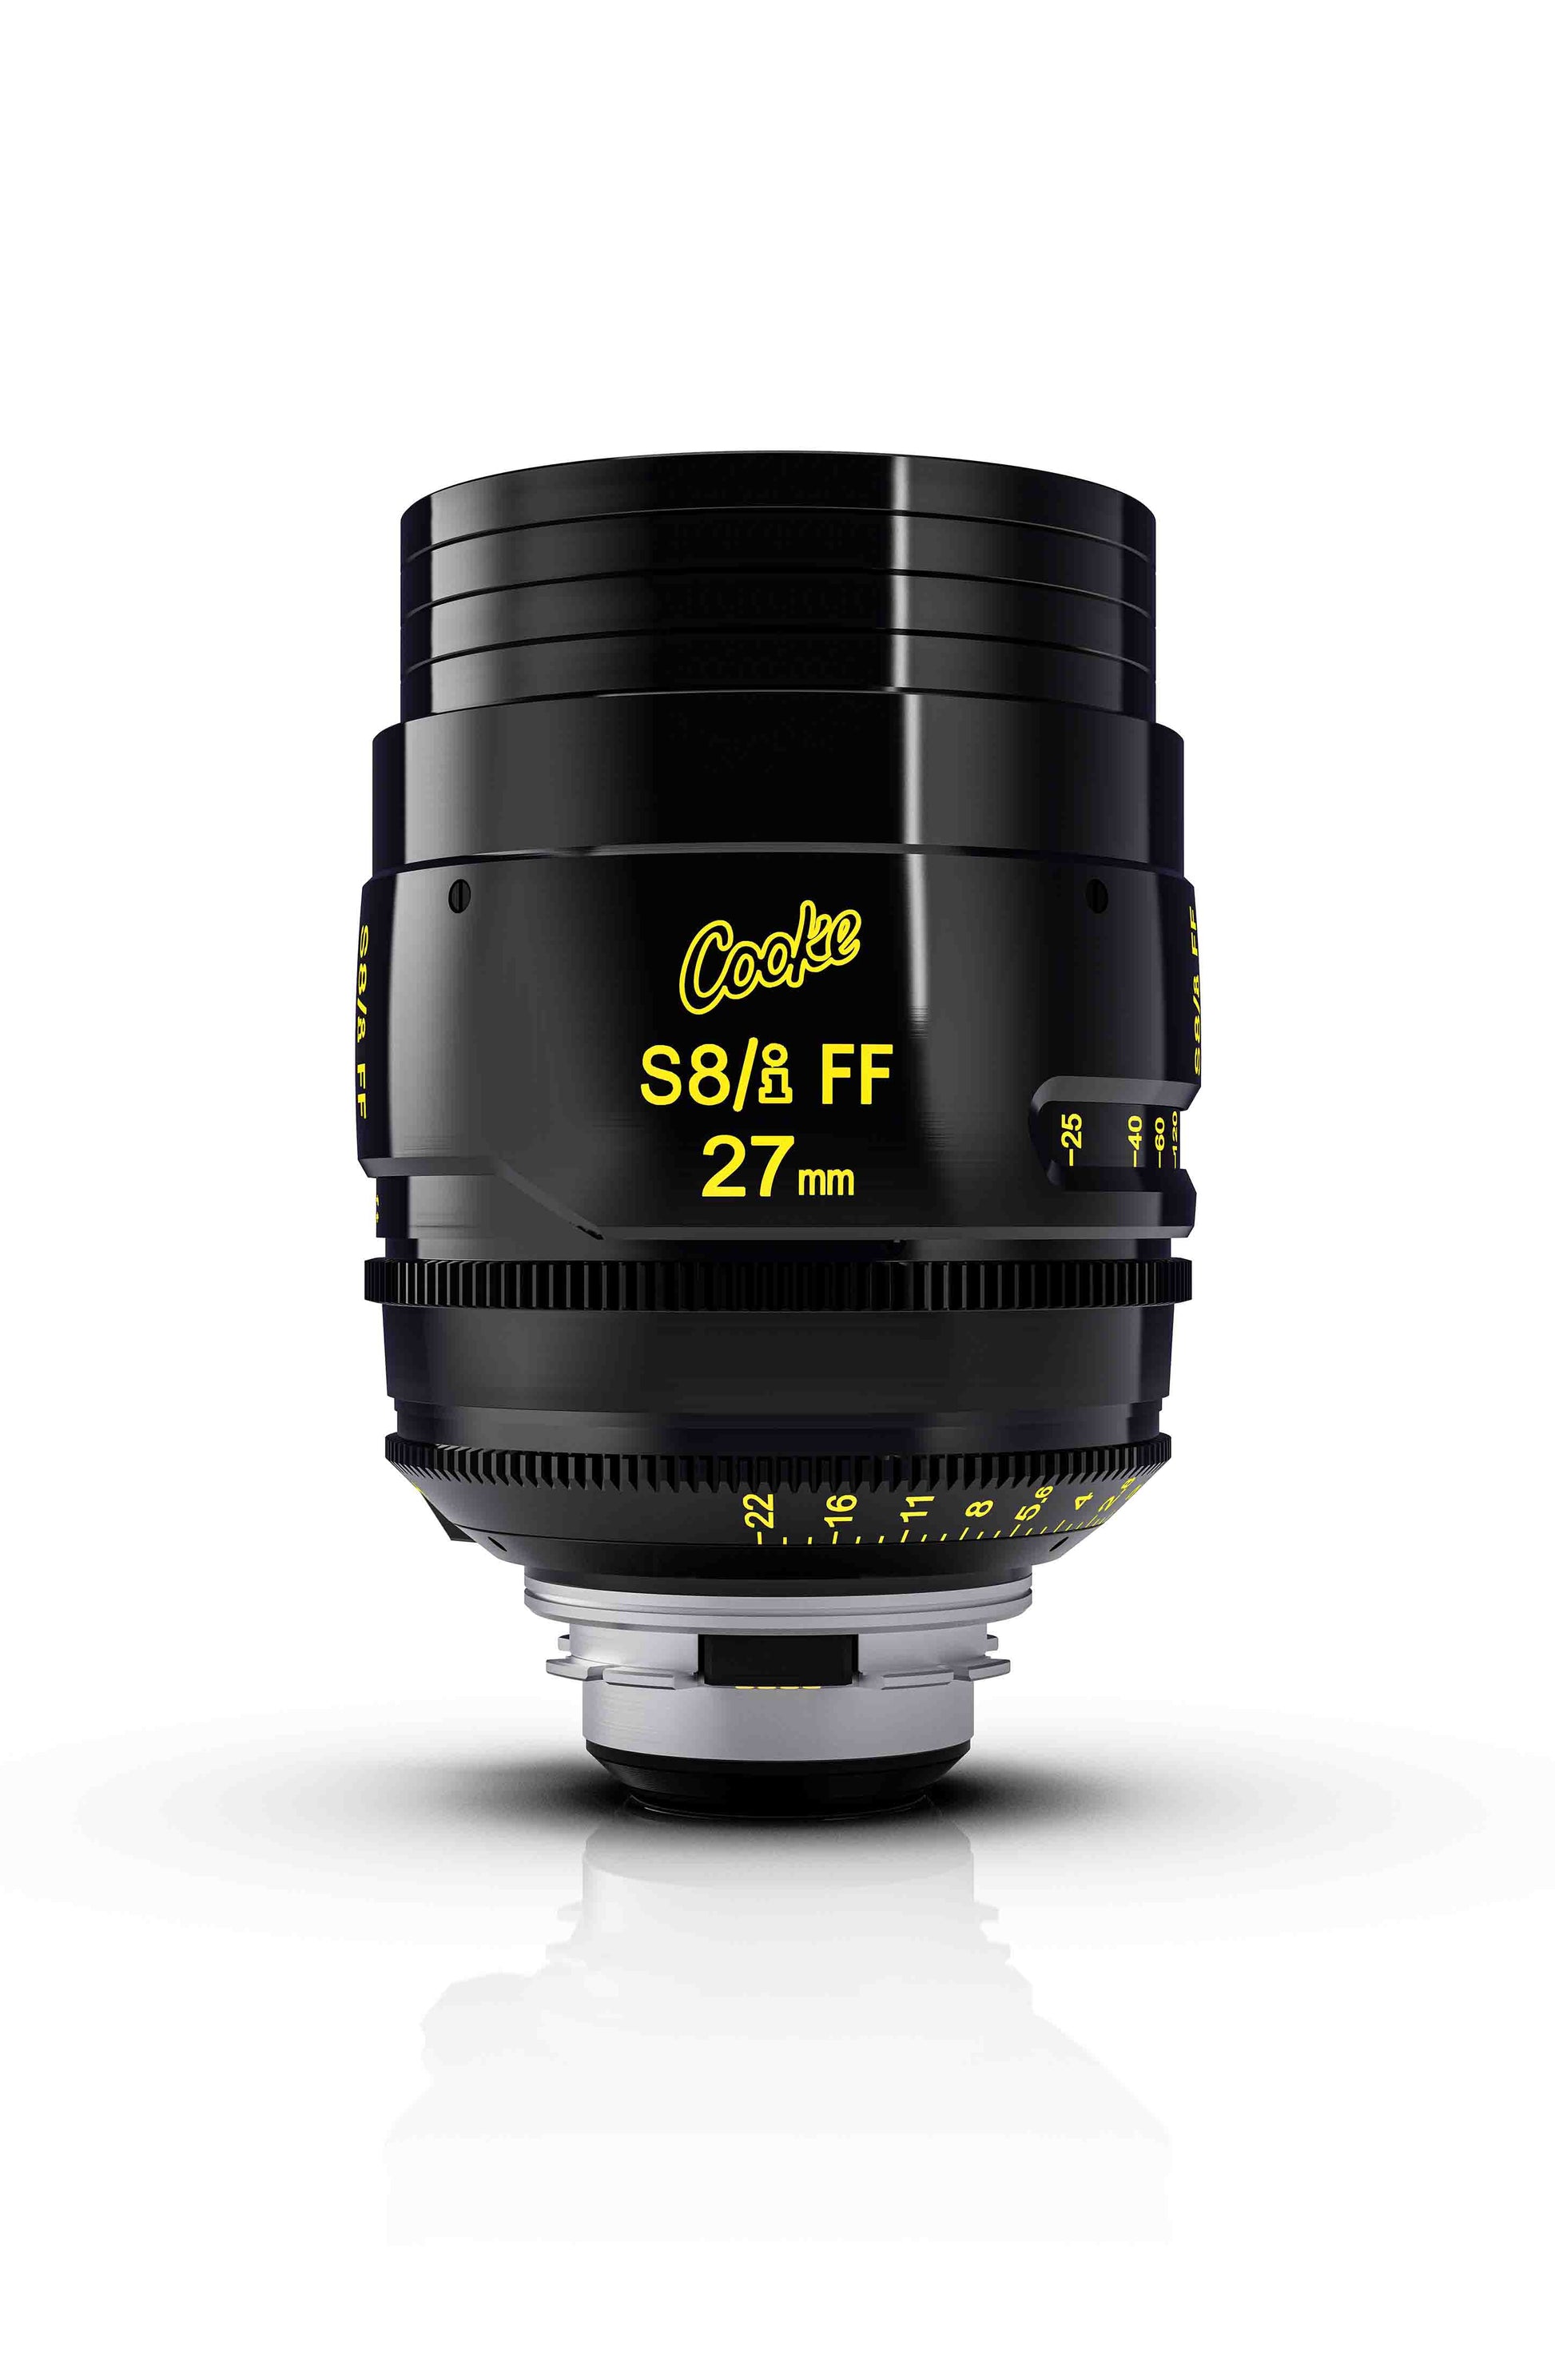 Cooke S8/iFF Prime Lens Series 18mm-135mm - HD Source